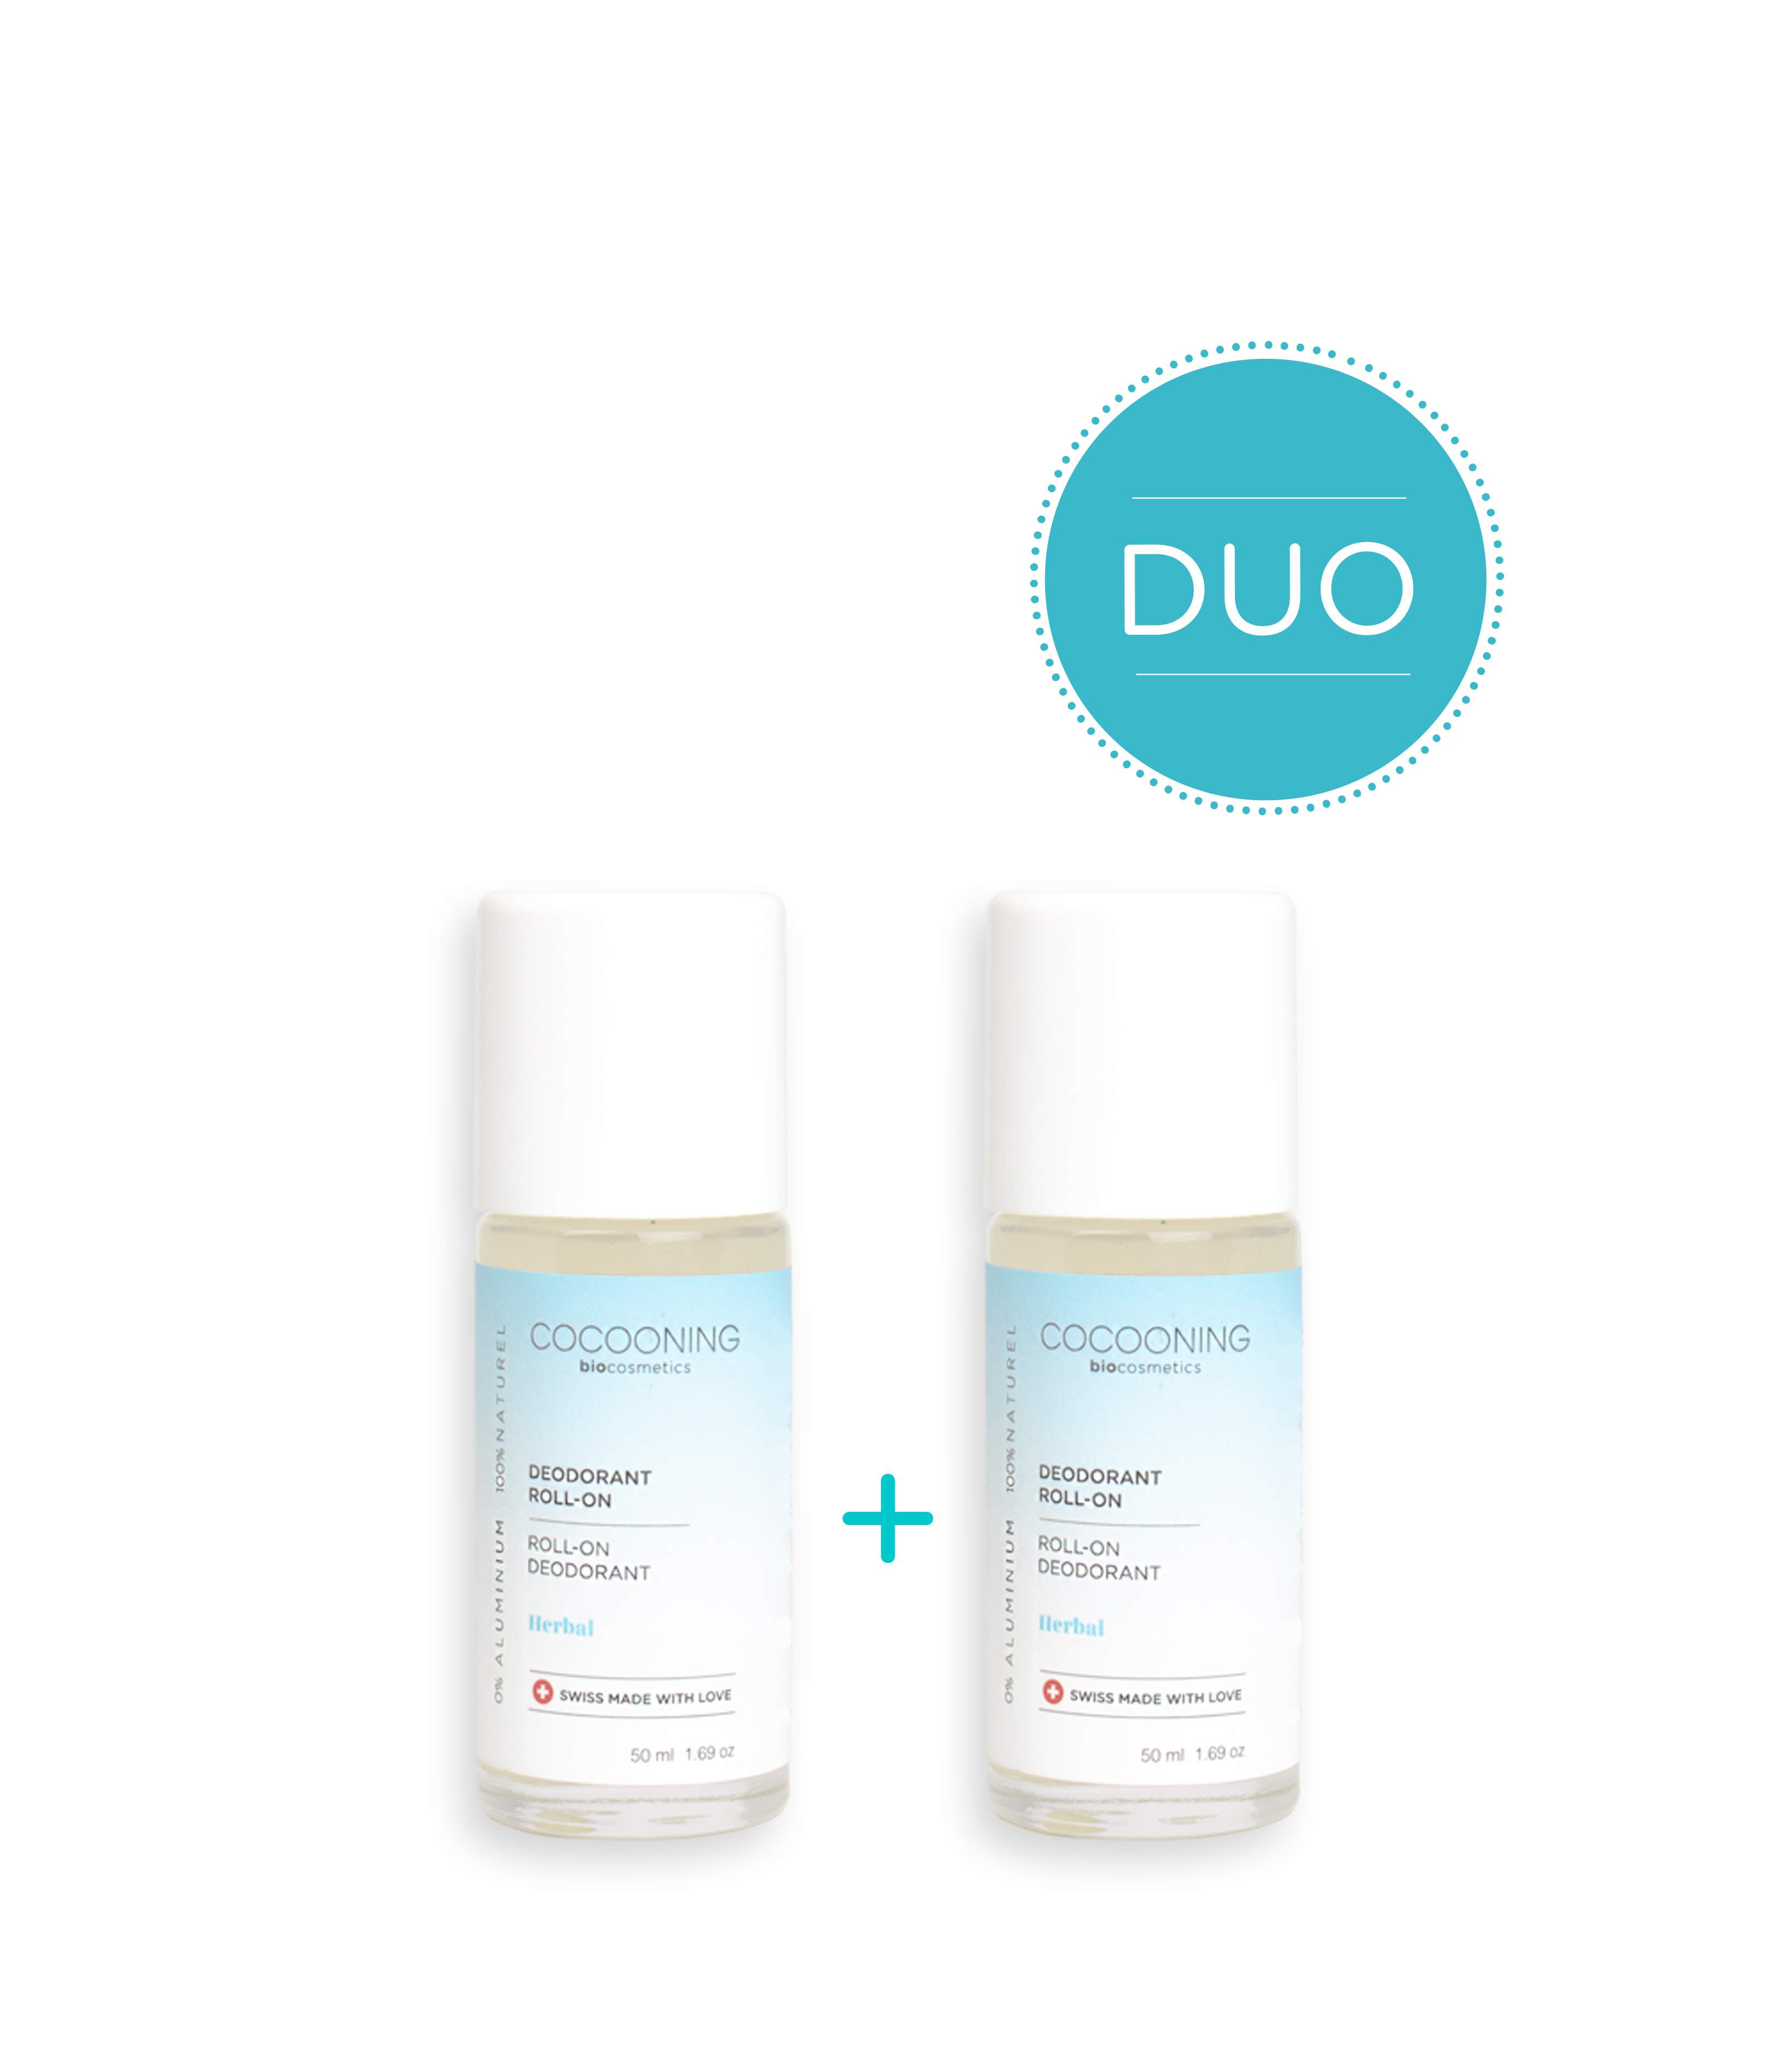 Duo deo 2 roll-on 2x 50ml